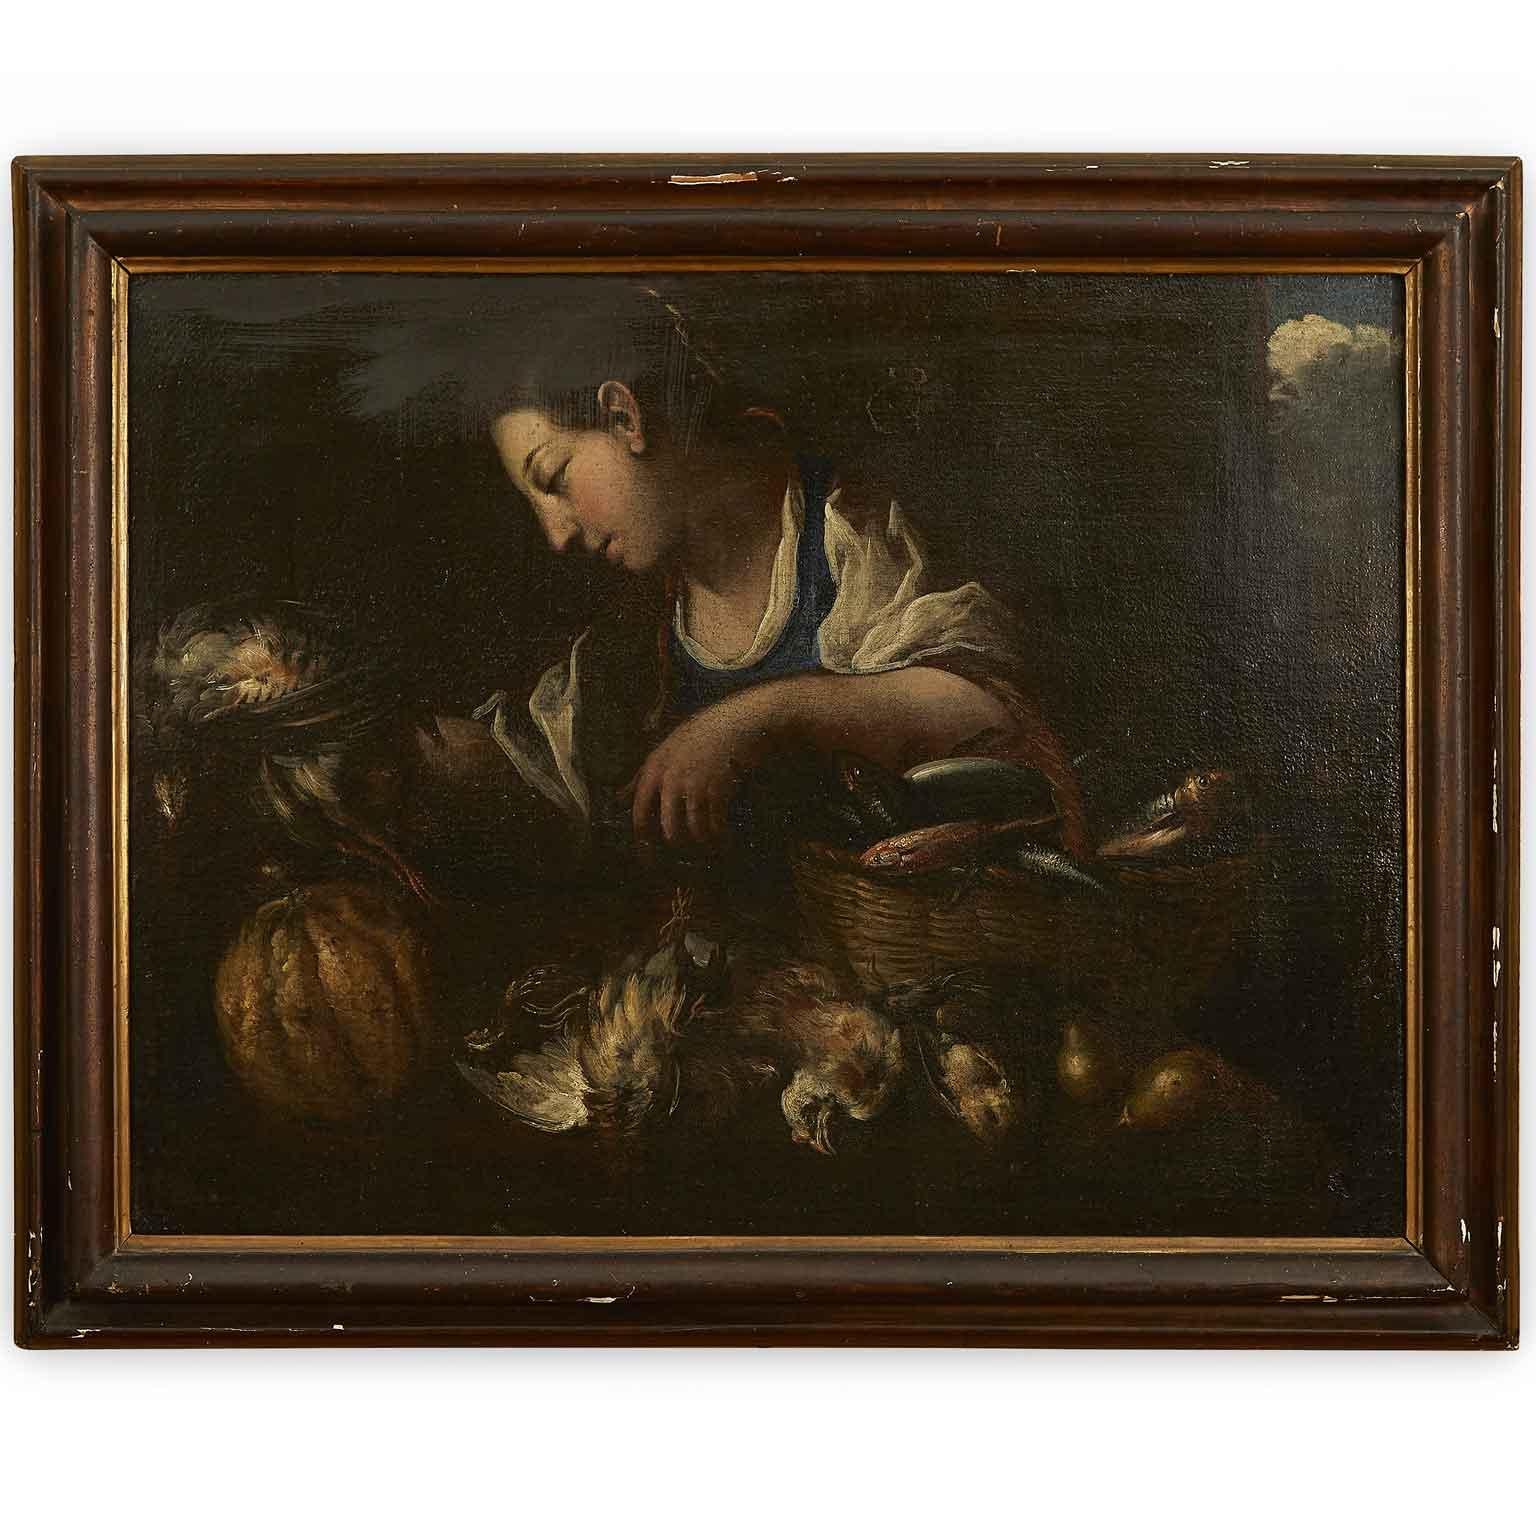 1600s Italian still life with Game Vegetables fish and cookmaid figure,late 17th century Italian oil on canvas painting depicting a female figure, a cookmaid with wicker basket on left arm, containing fish of various kinds and a bird clutched in